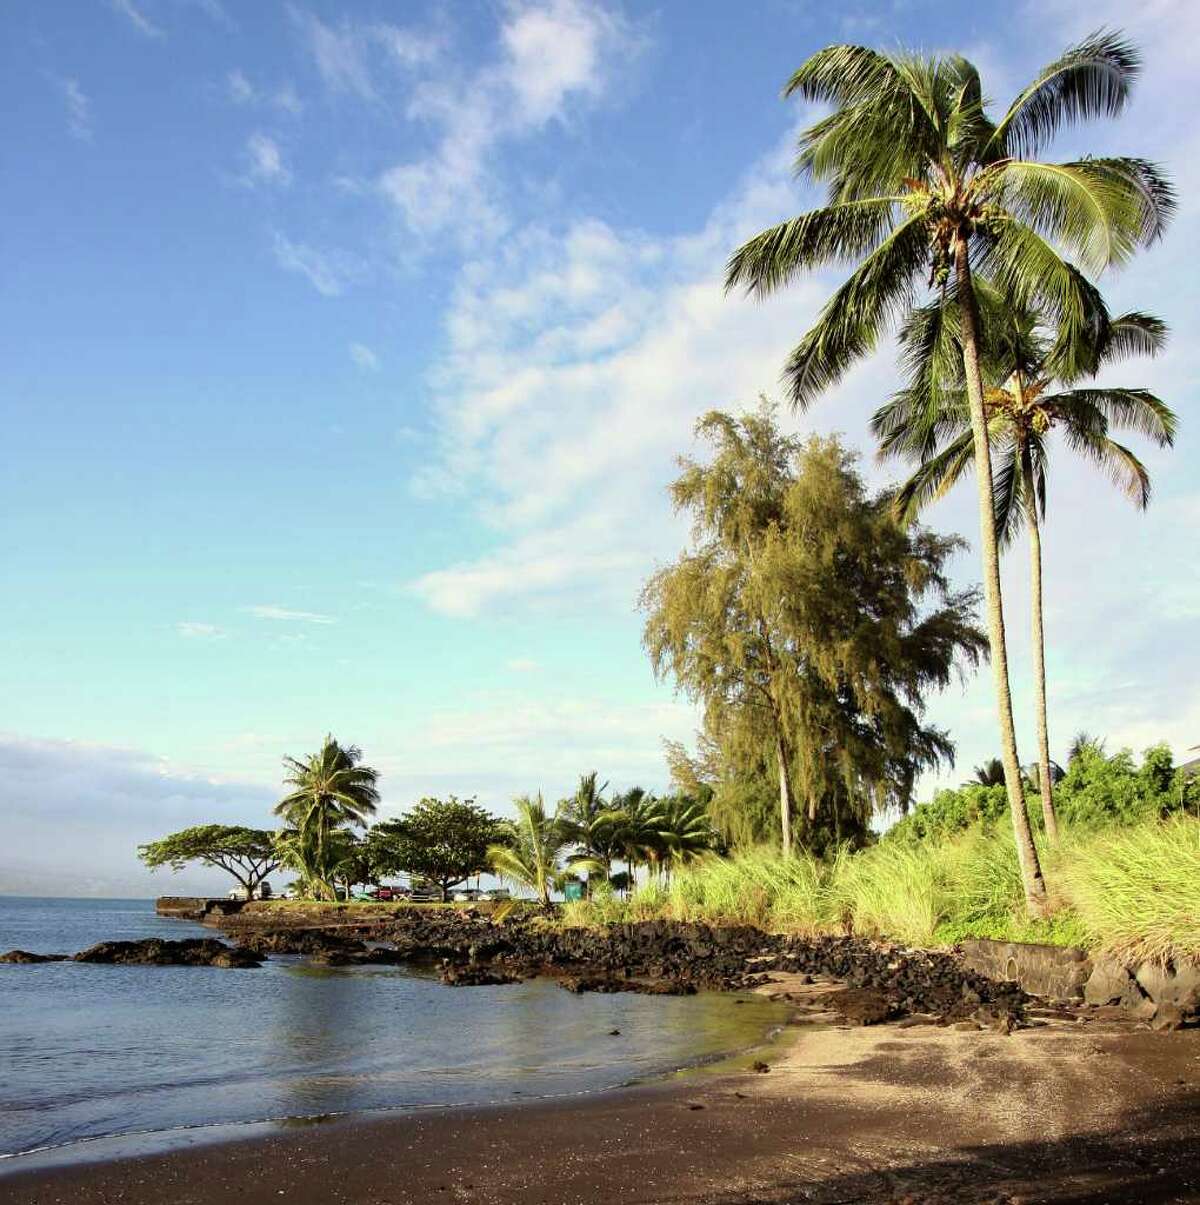 According to an unpublished Smithsonian Institution chart, the U.S. Exploring Expedition arrived in Hawaii in 1840 at this small, unmarked beach.